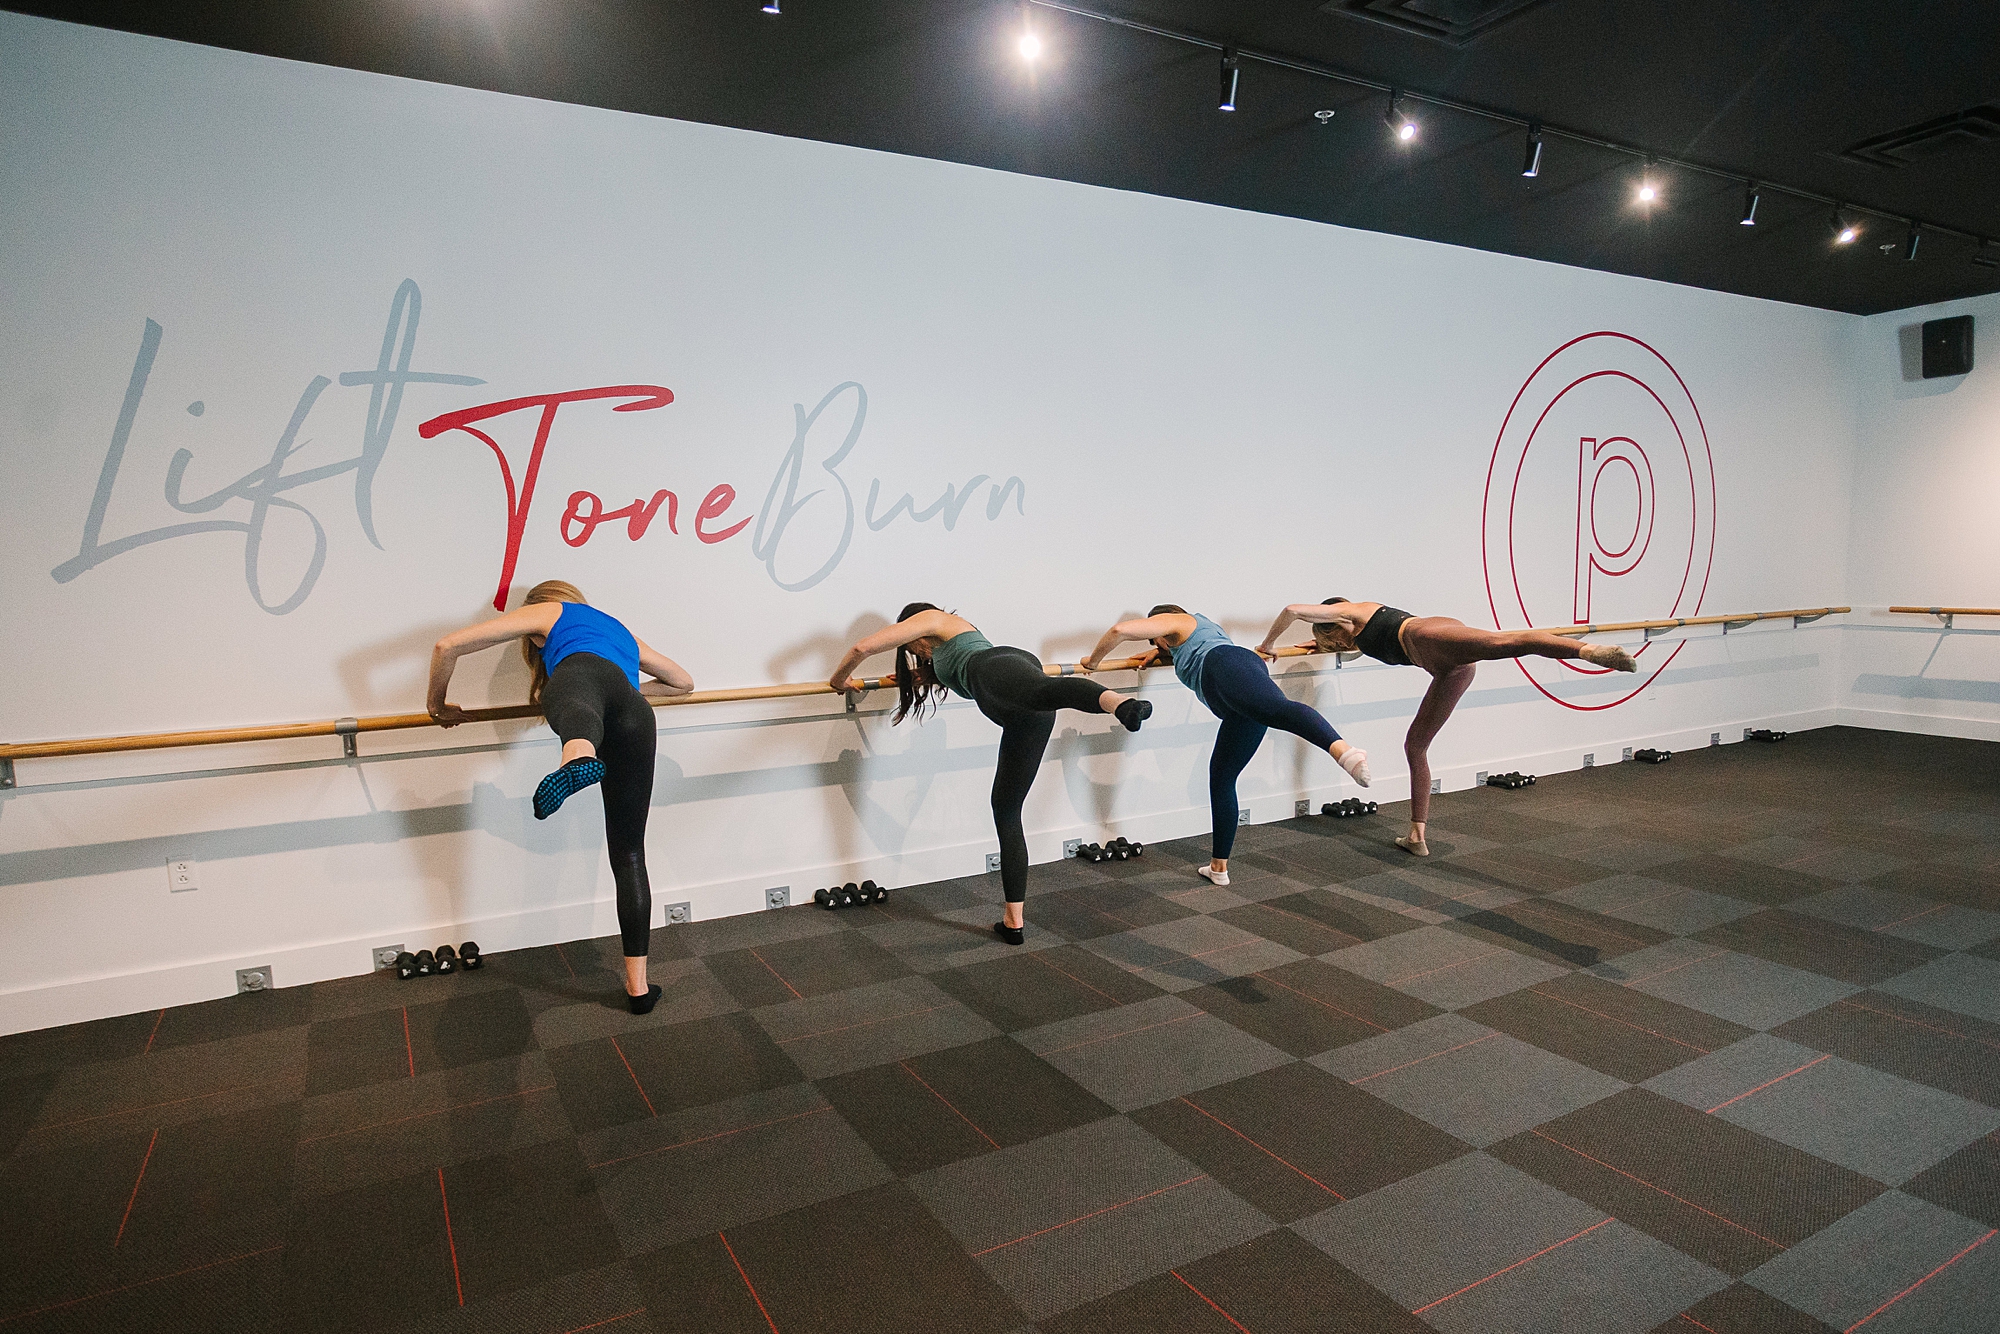 instructors lean over barre during fitness branding photos